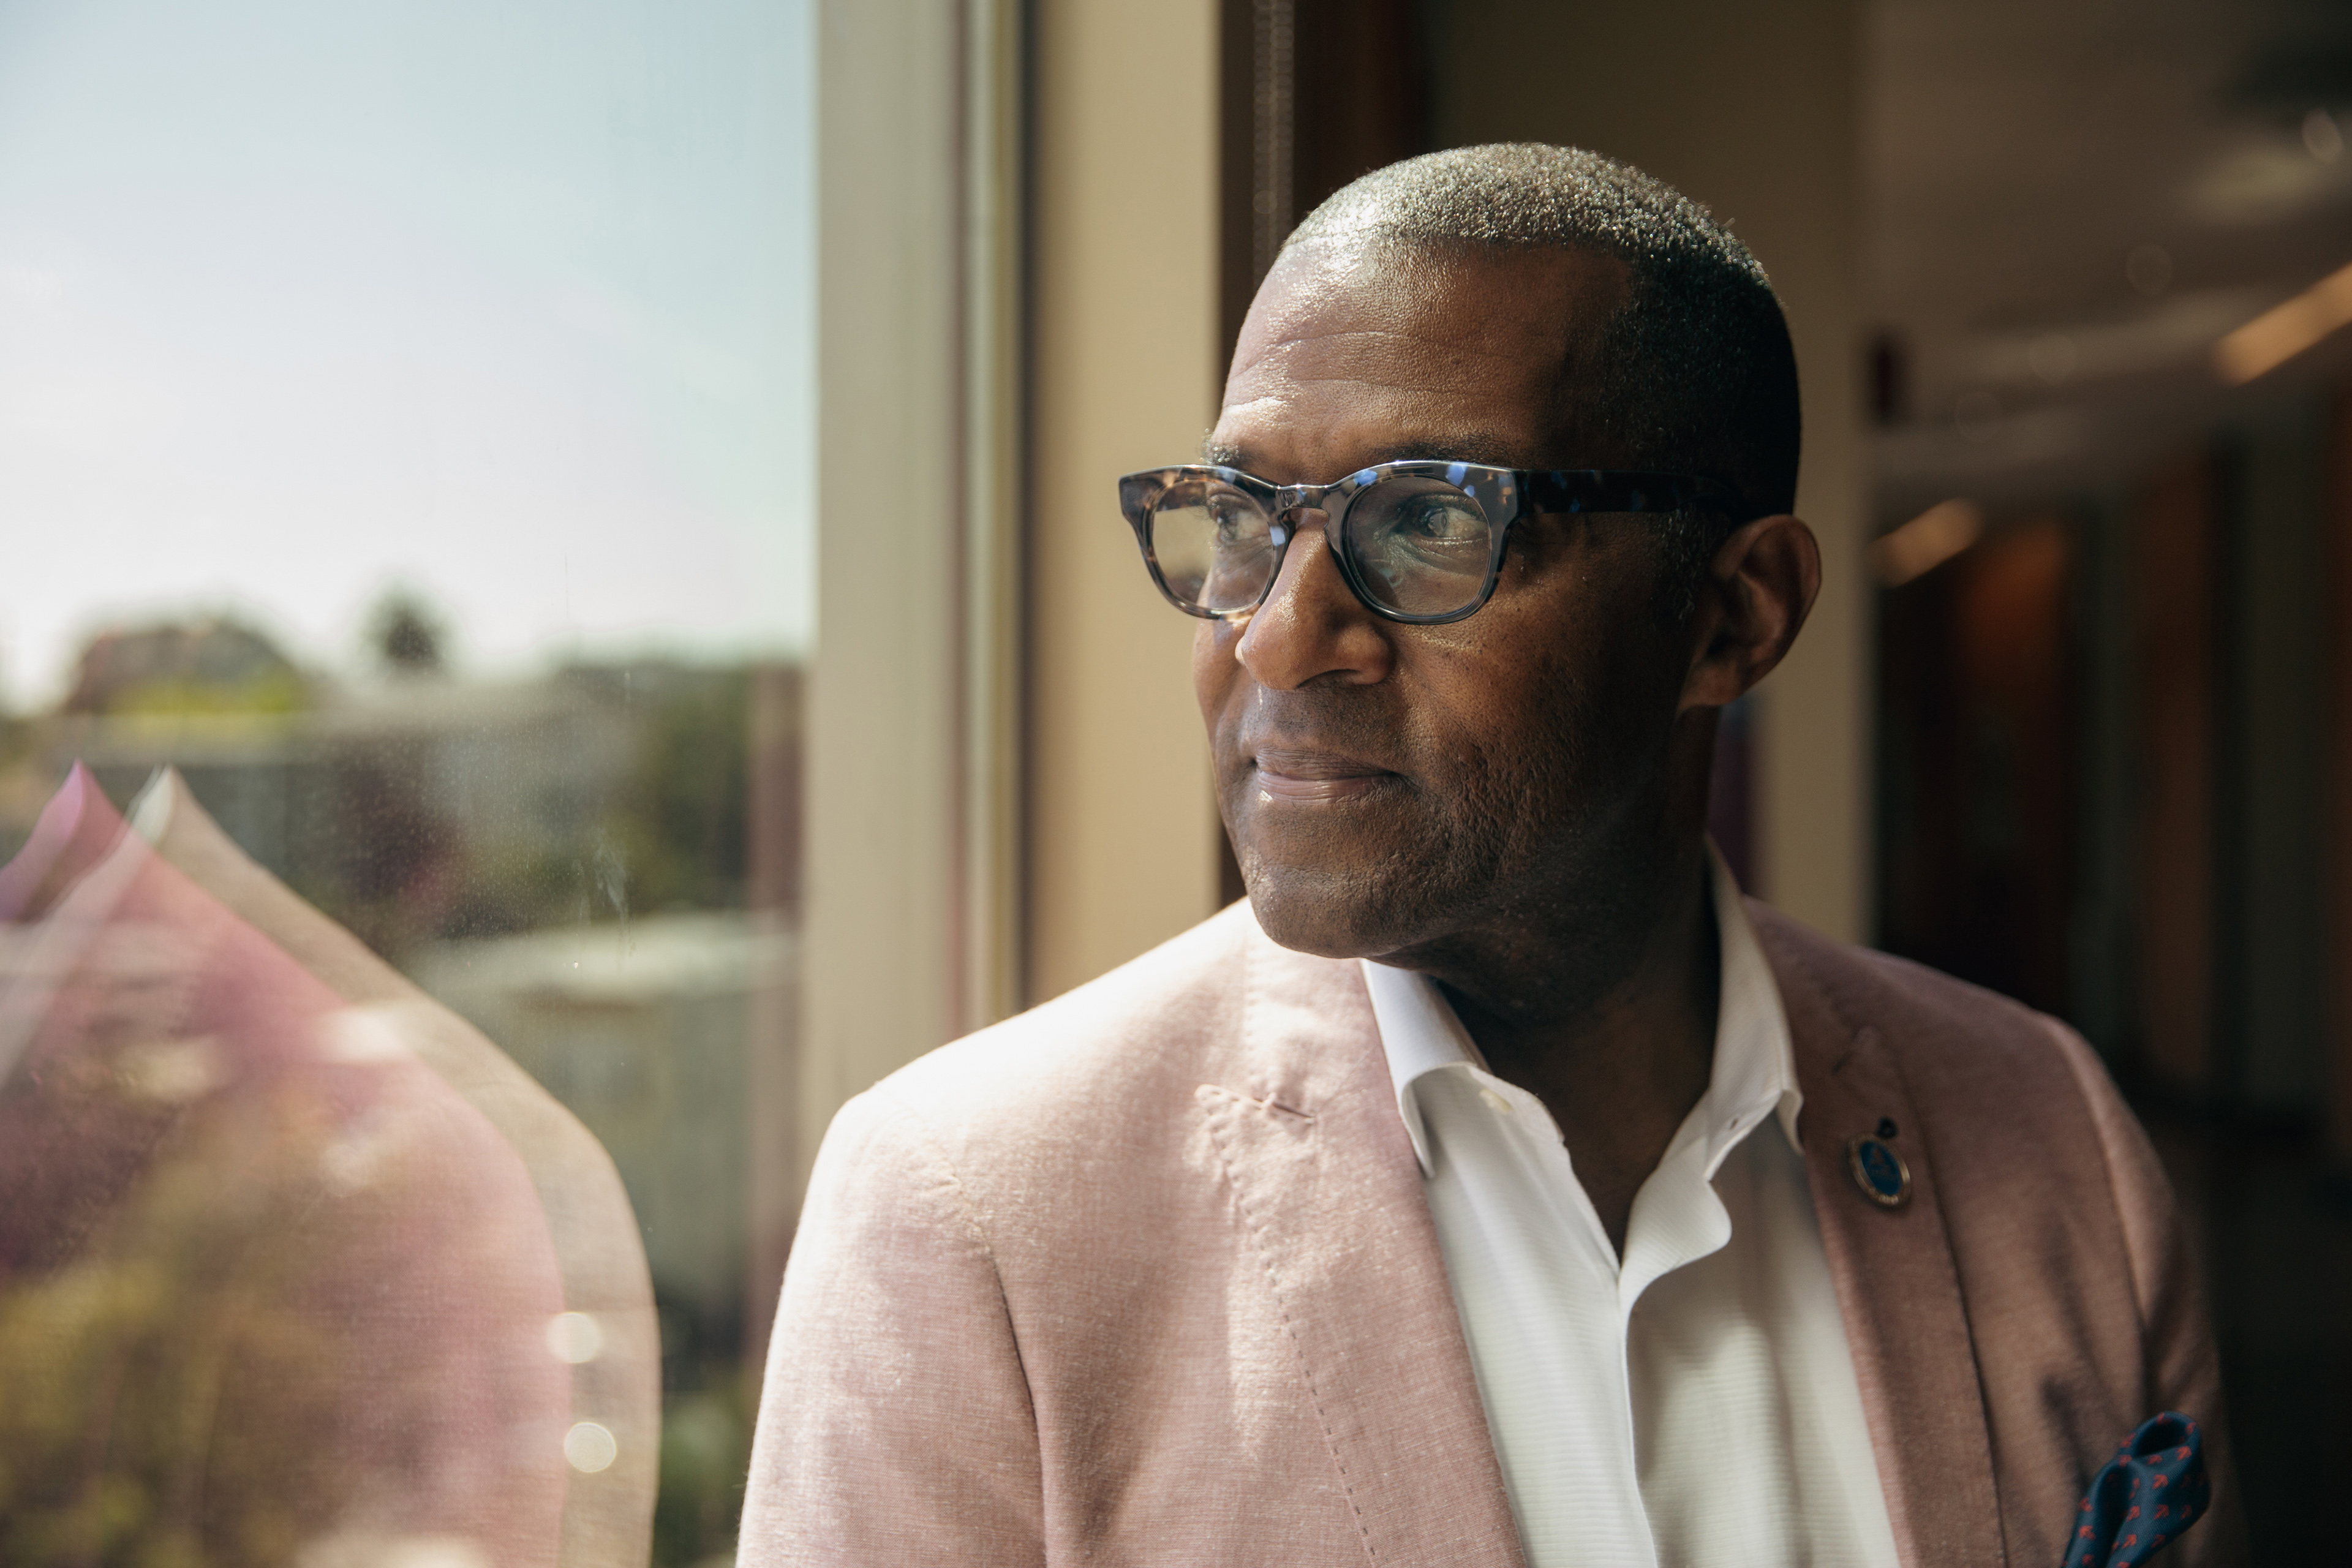 A man stands beside and looks out a large sunny window. He wears glasses and a blazer over his collared shirt.